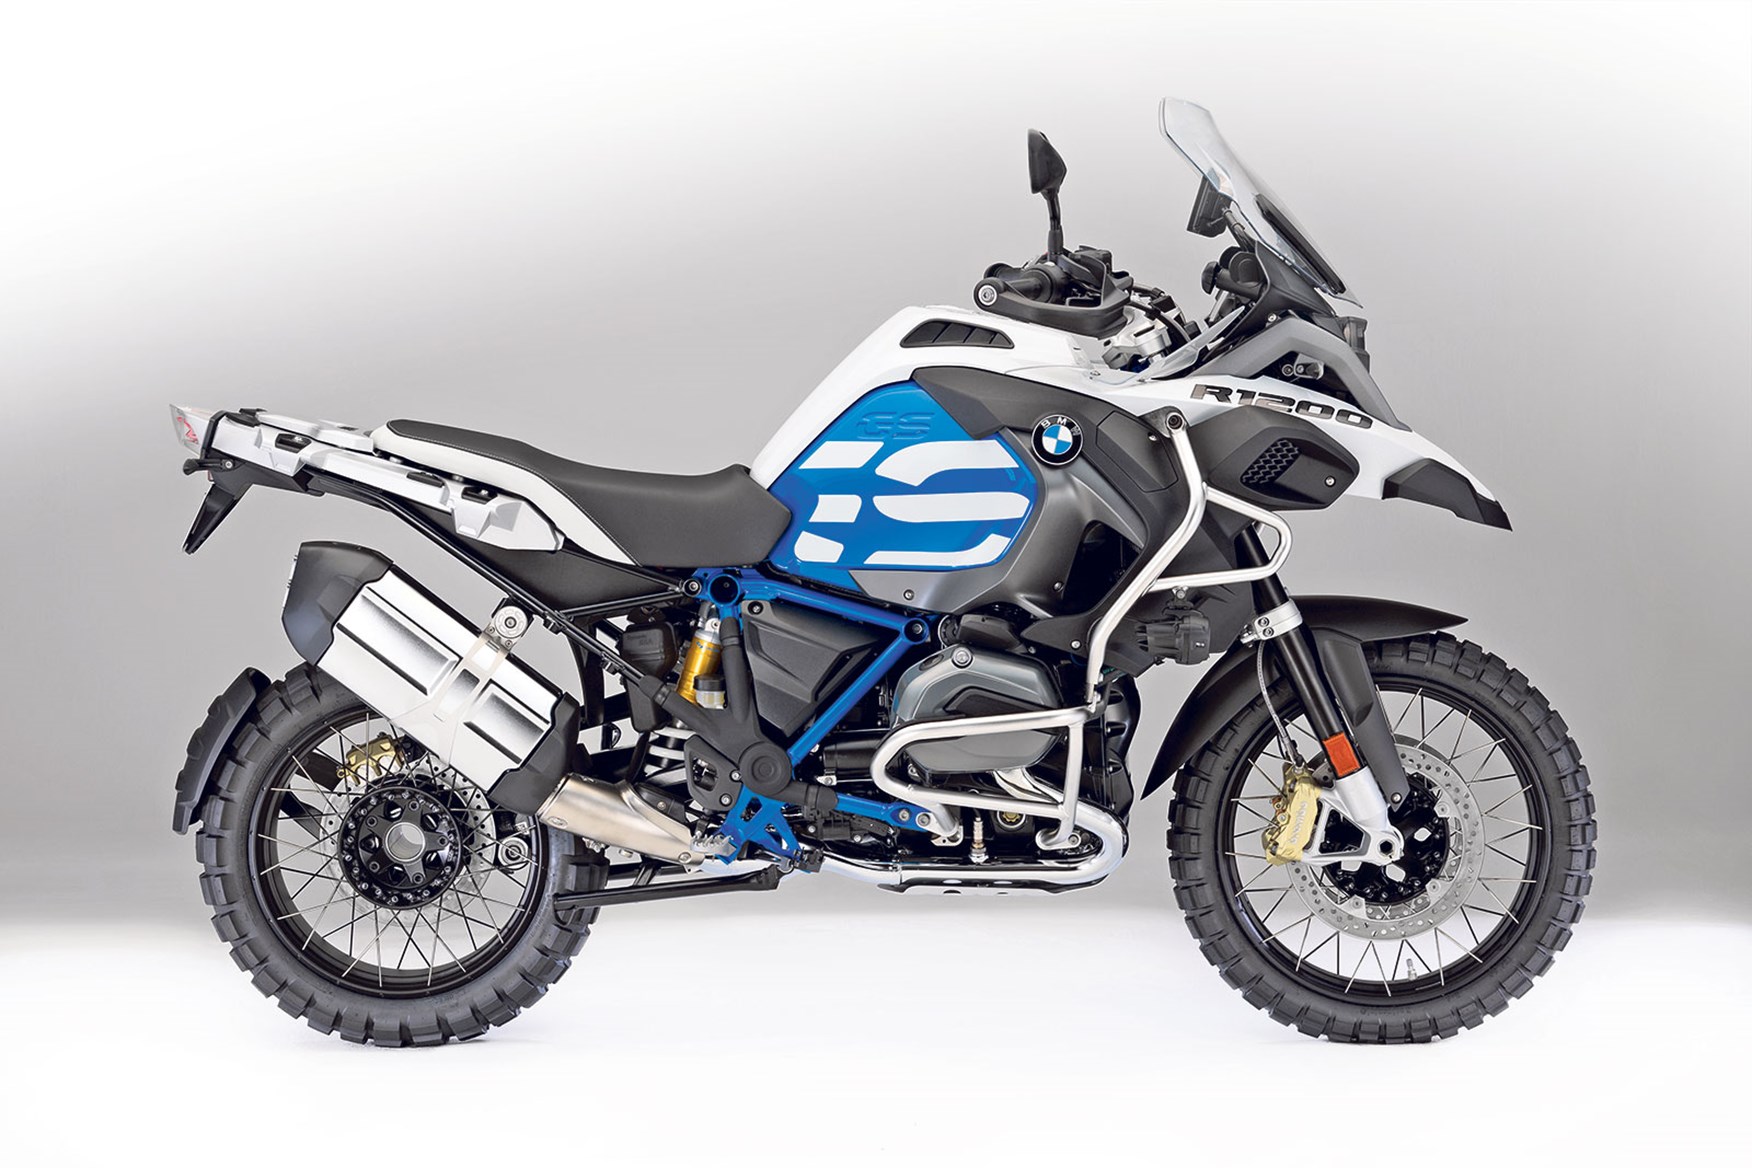 Bmw R 1200 Gs Price In India